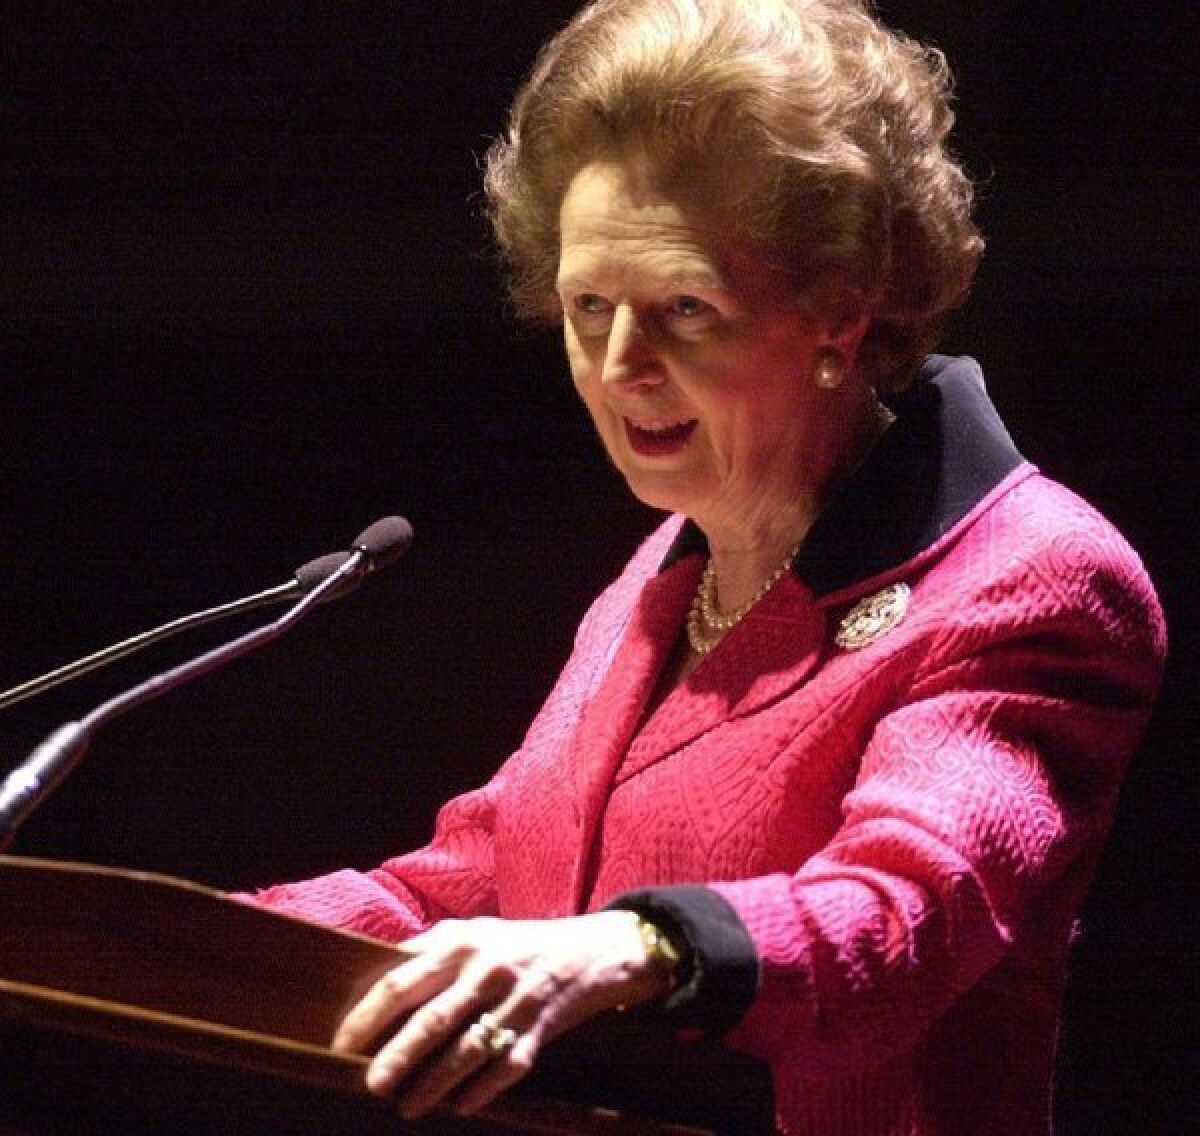 Former British Prime Minister Margaret Thatcher, who died Monday of a stroke, also suffered from dementia.